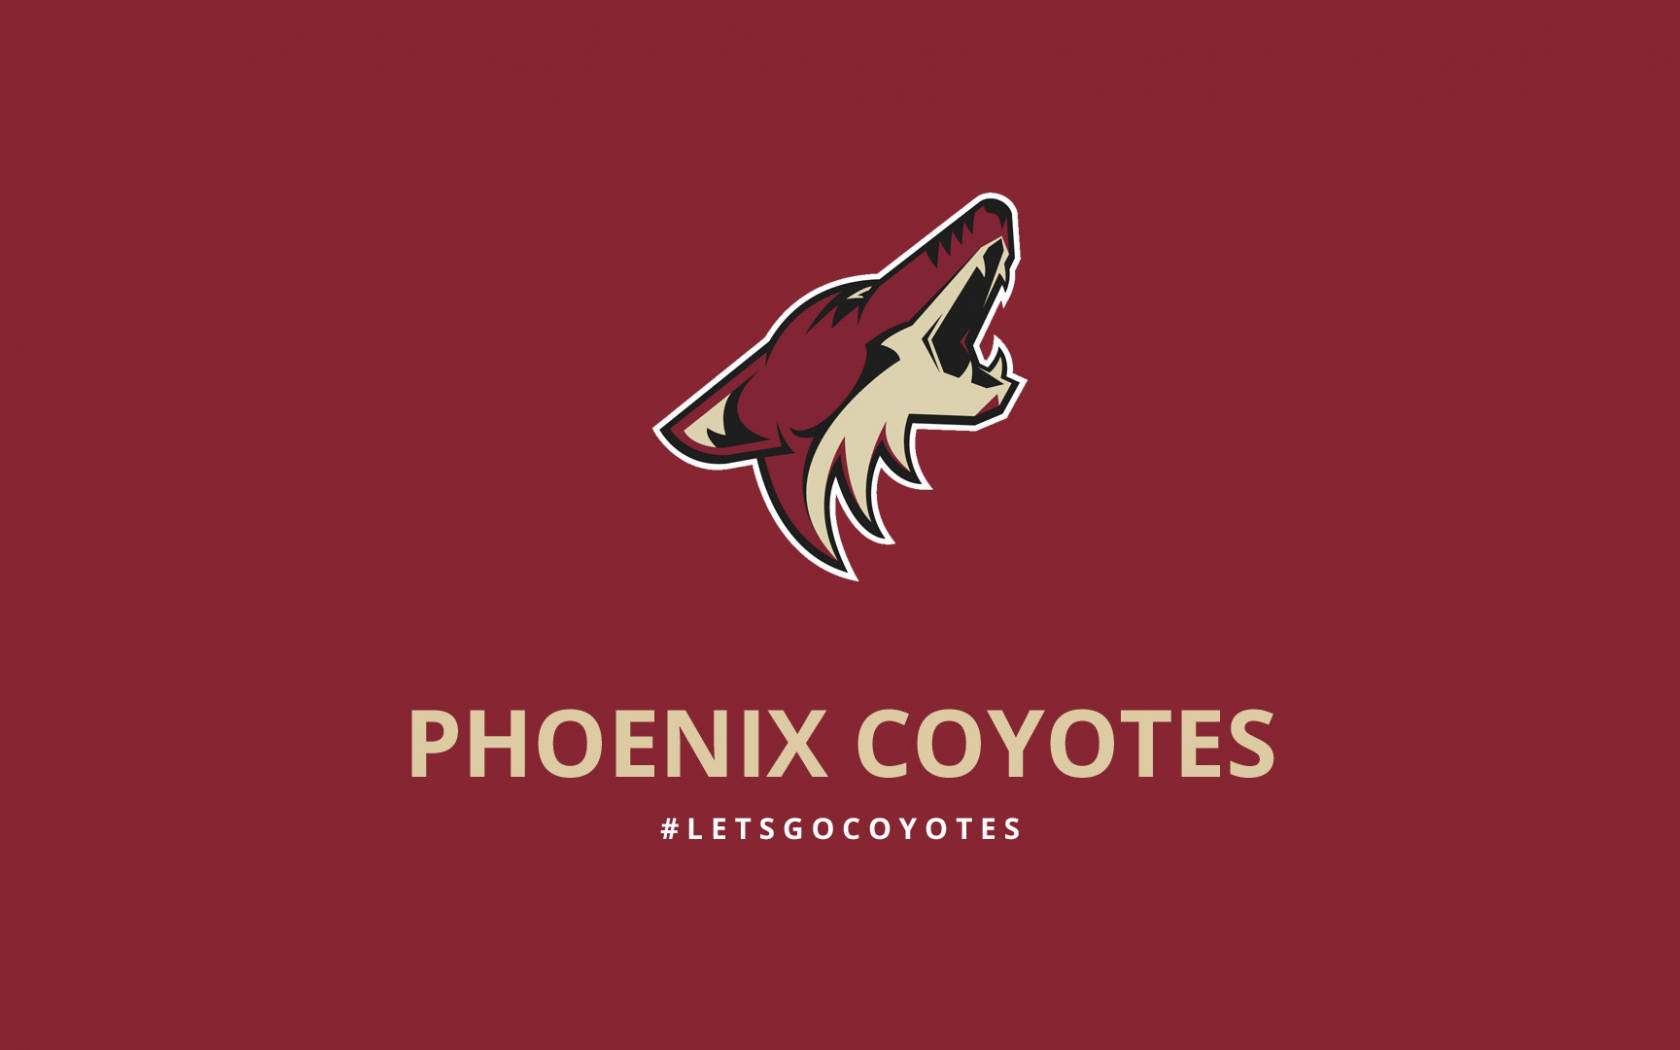 Arizona Coyotes On Red Wallpaper